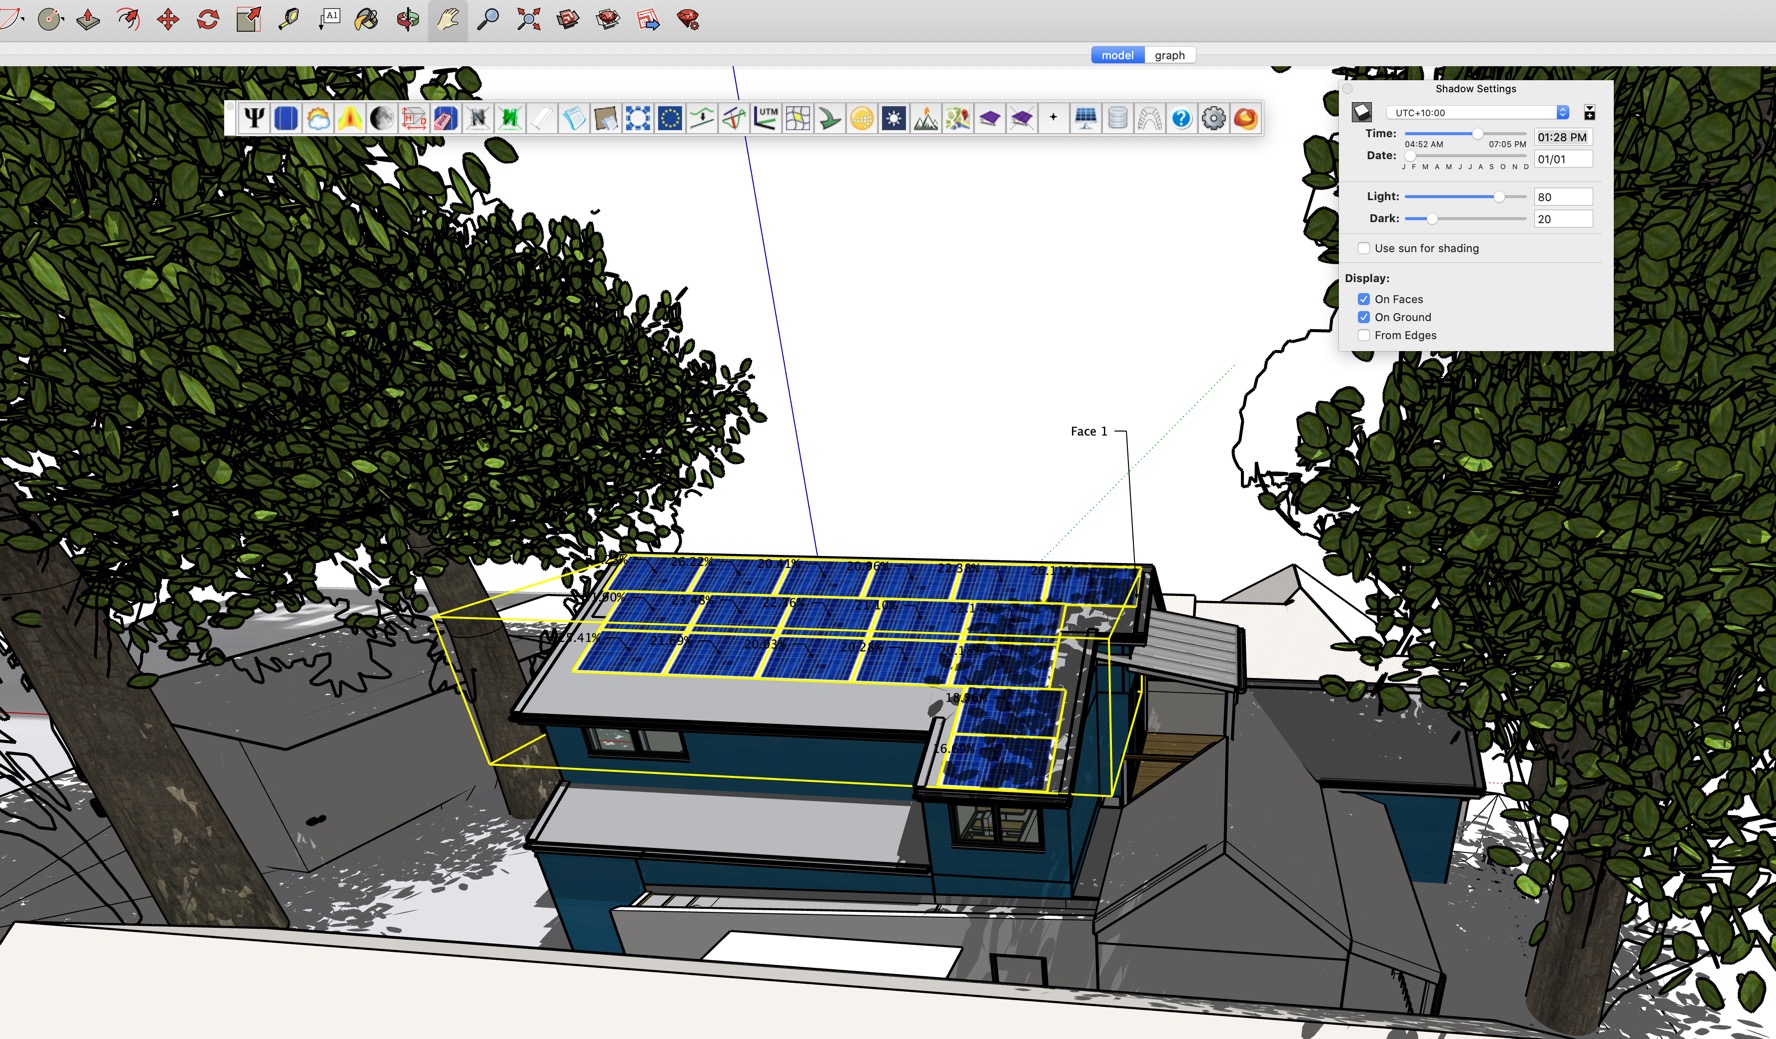 House, solar panels and trees - afternoon shading